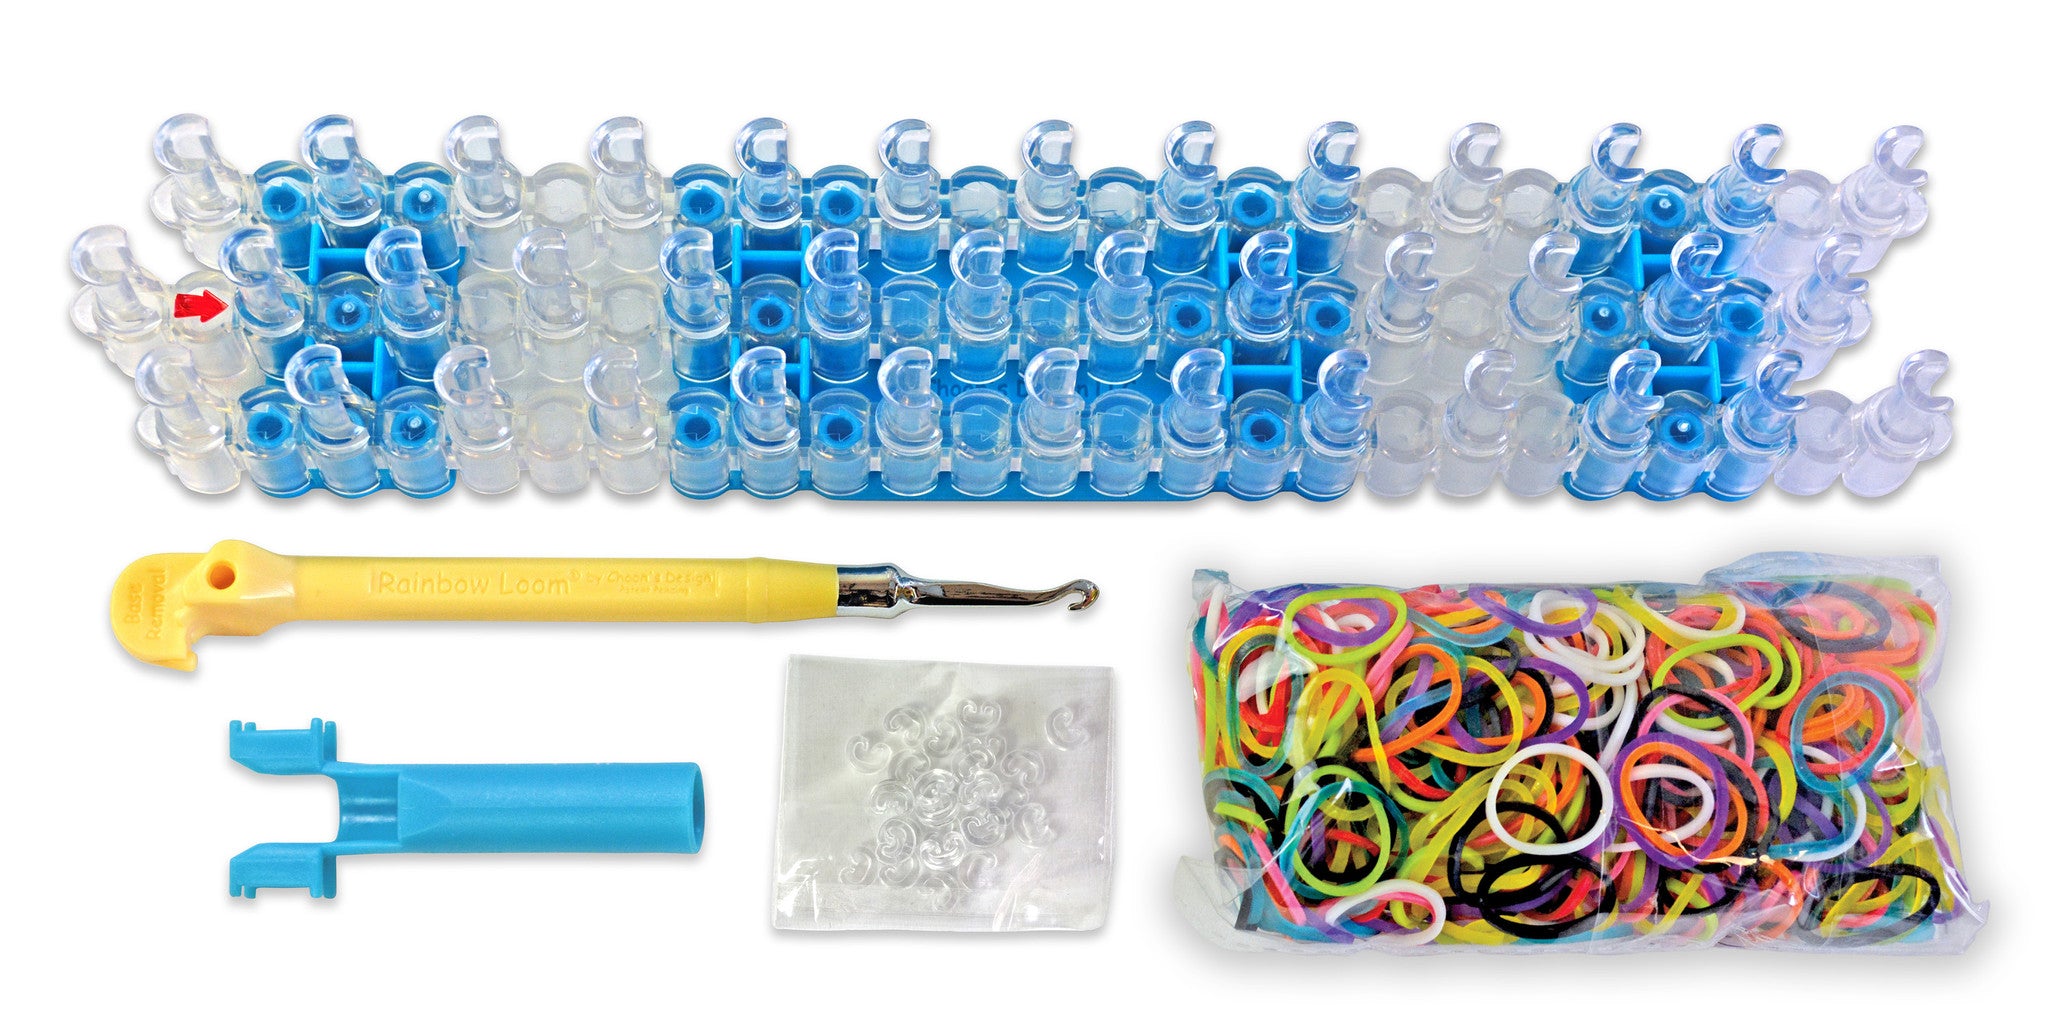 loom band instructions with hook